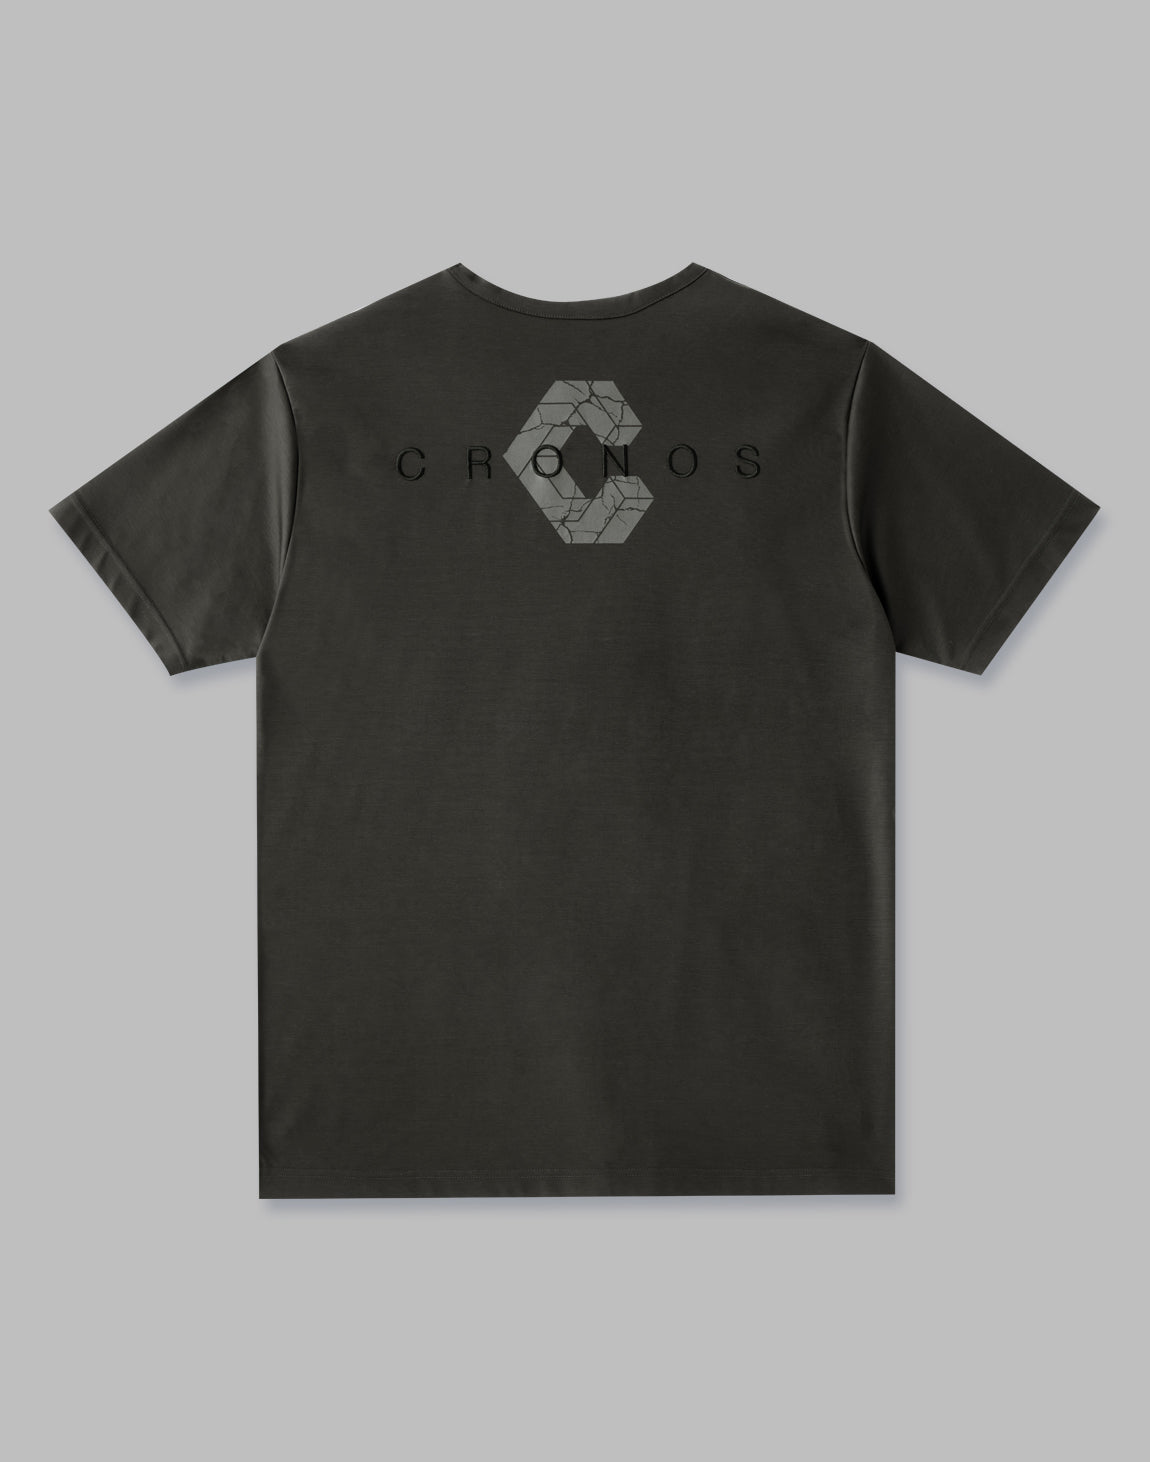 CRONOS BLACK STRETCH T-SHIRTS – クロノス CRONOS Official Store